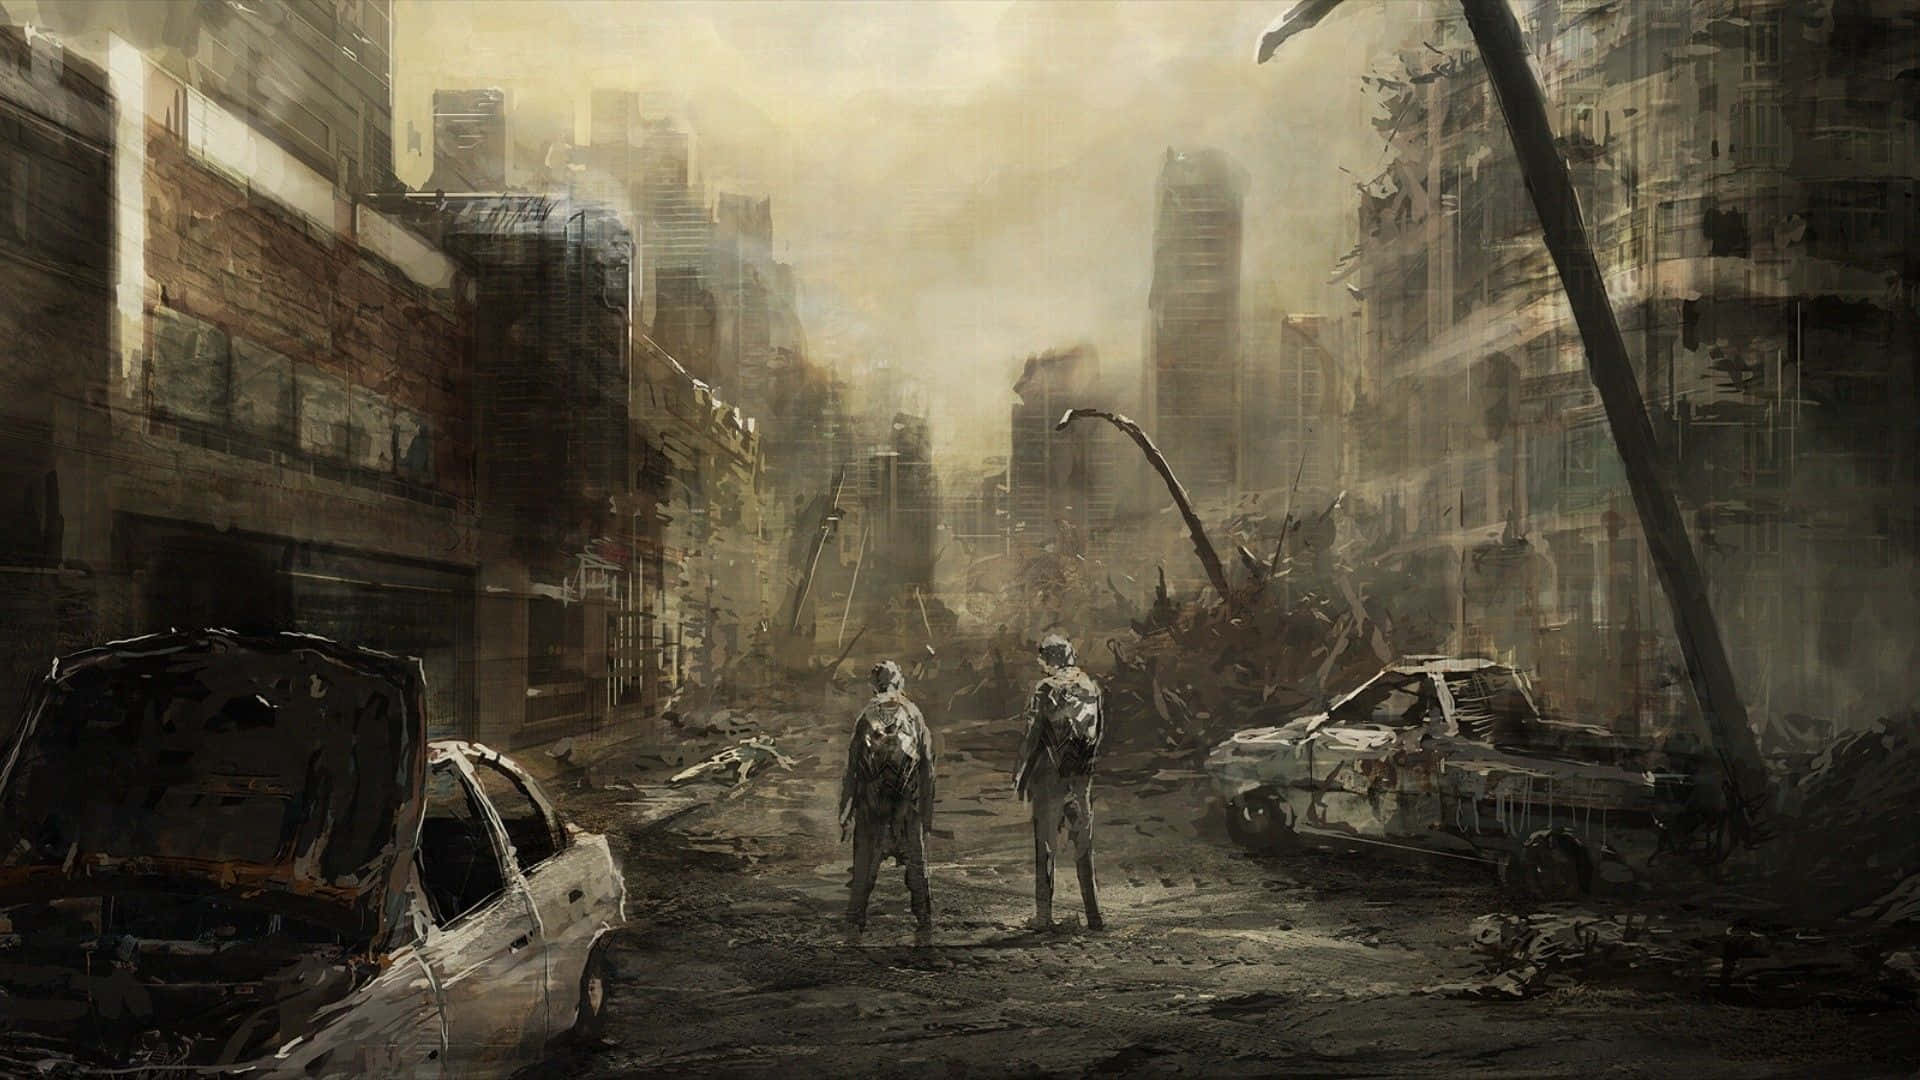 Global Civil Unrest as the Apocalypse Nears Wallpaper